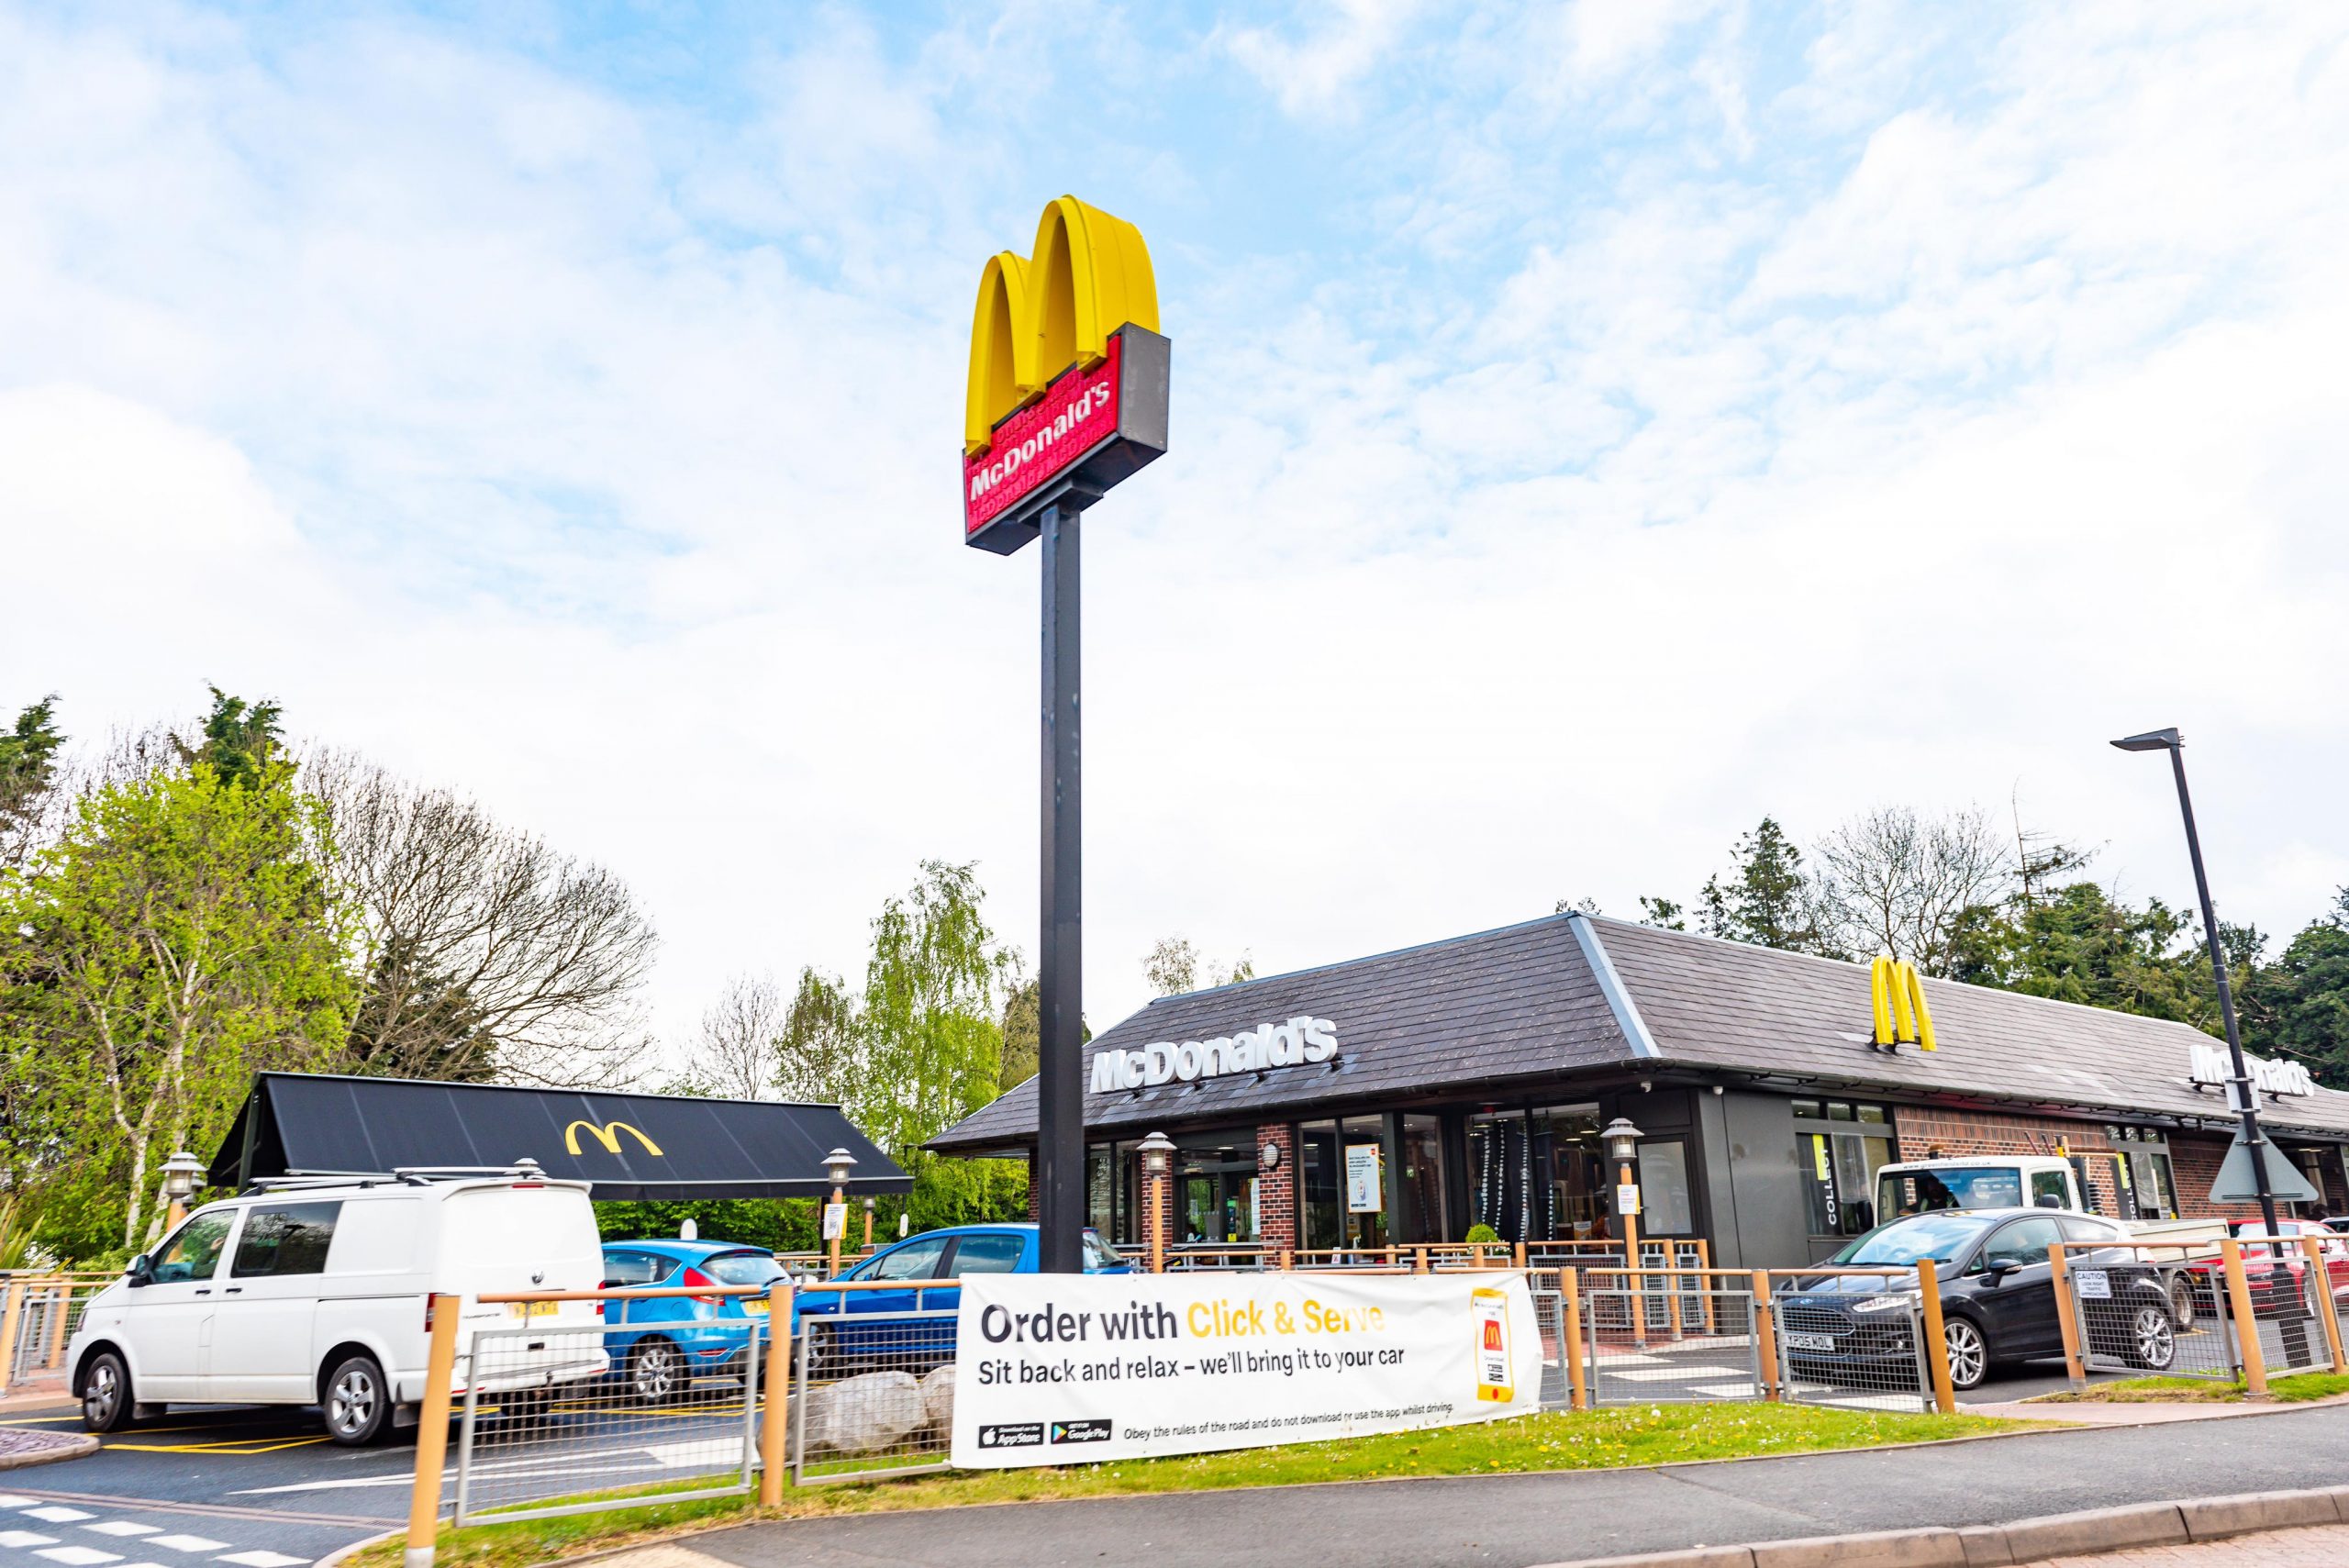 NEWS | McDonald’s say 65 jobs will be created if new Drive-Thru restaurant gets go ahead in Herefordshire